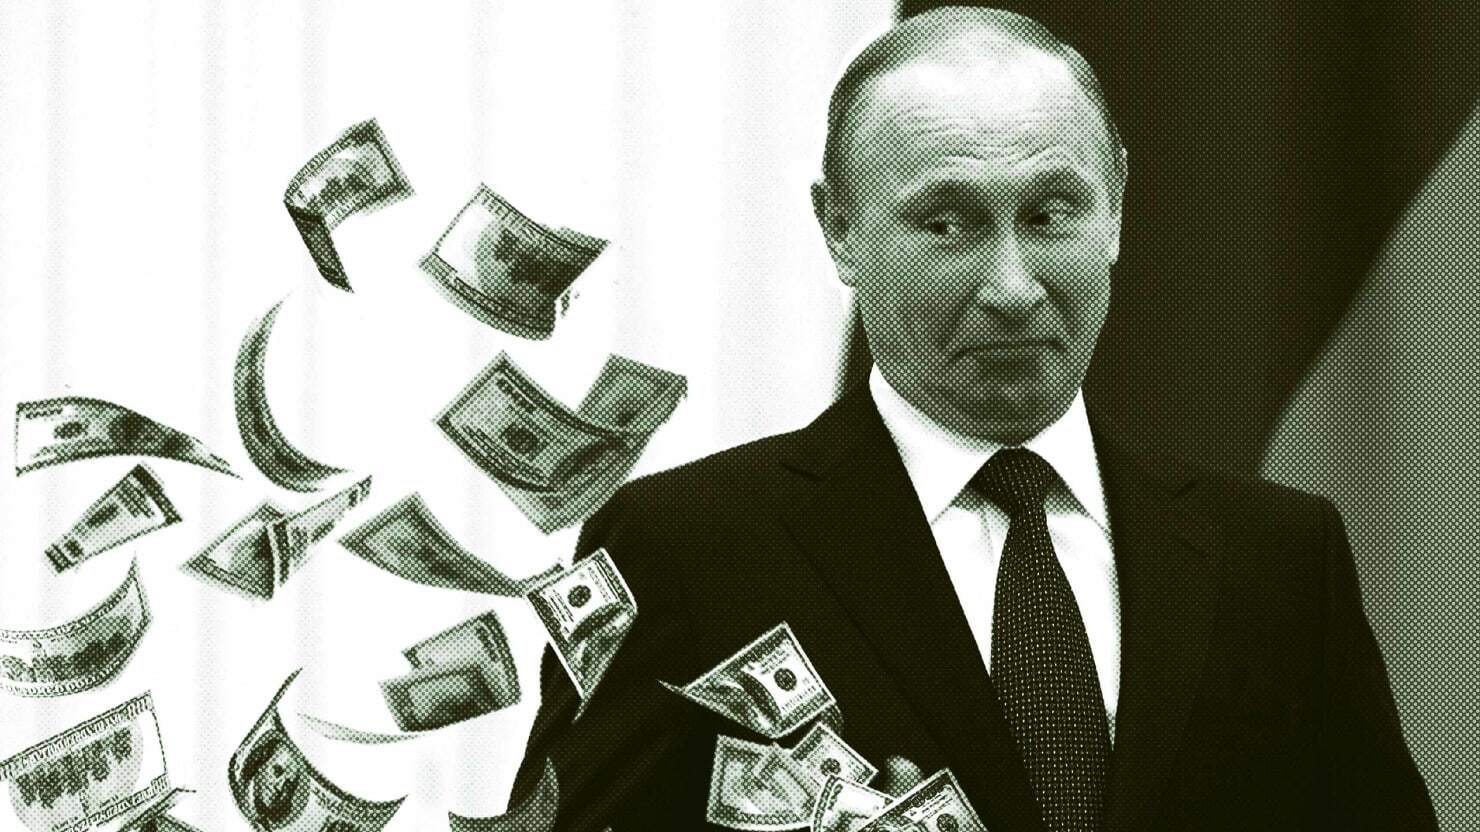 Russia Split Banking System - How Is Putin Preparing For This?